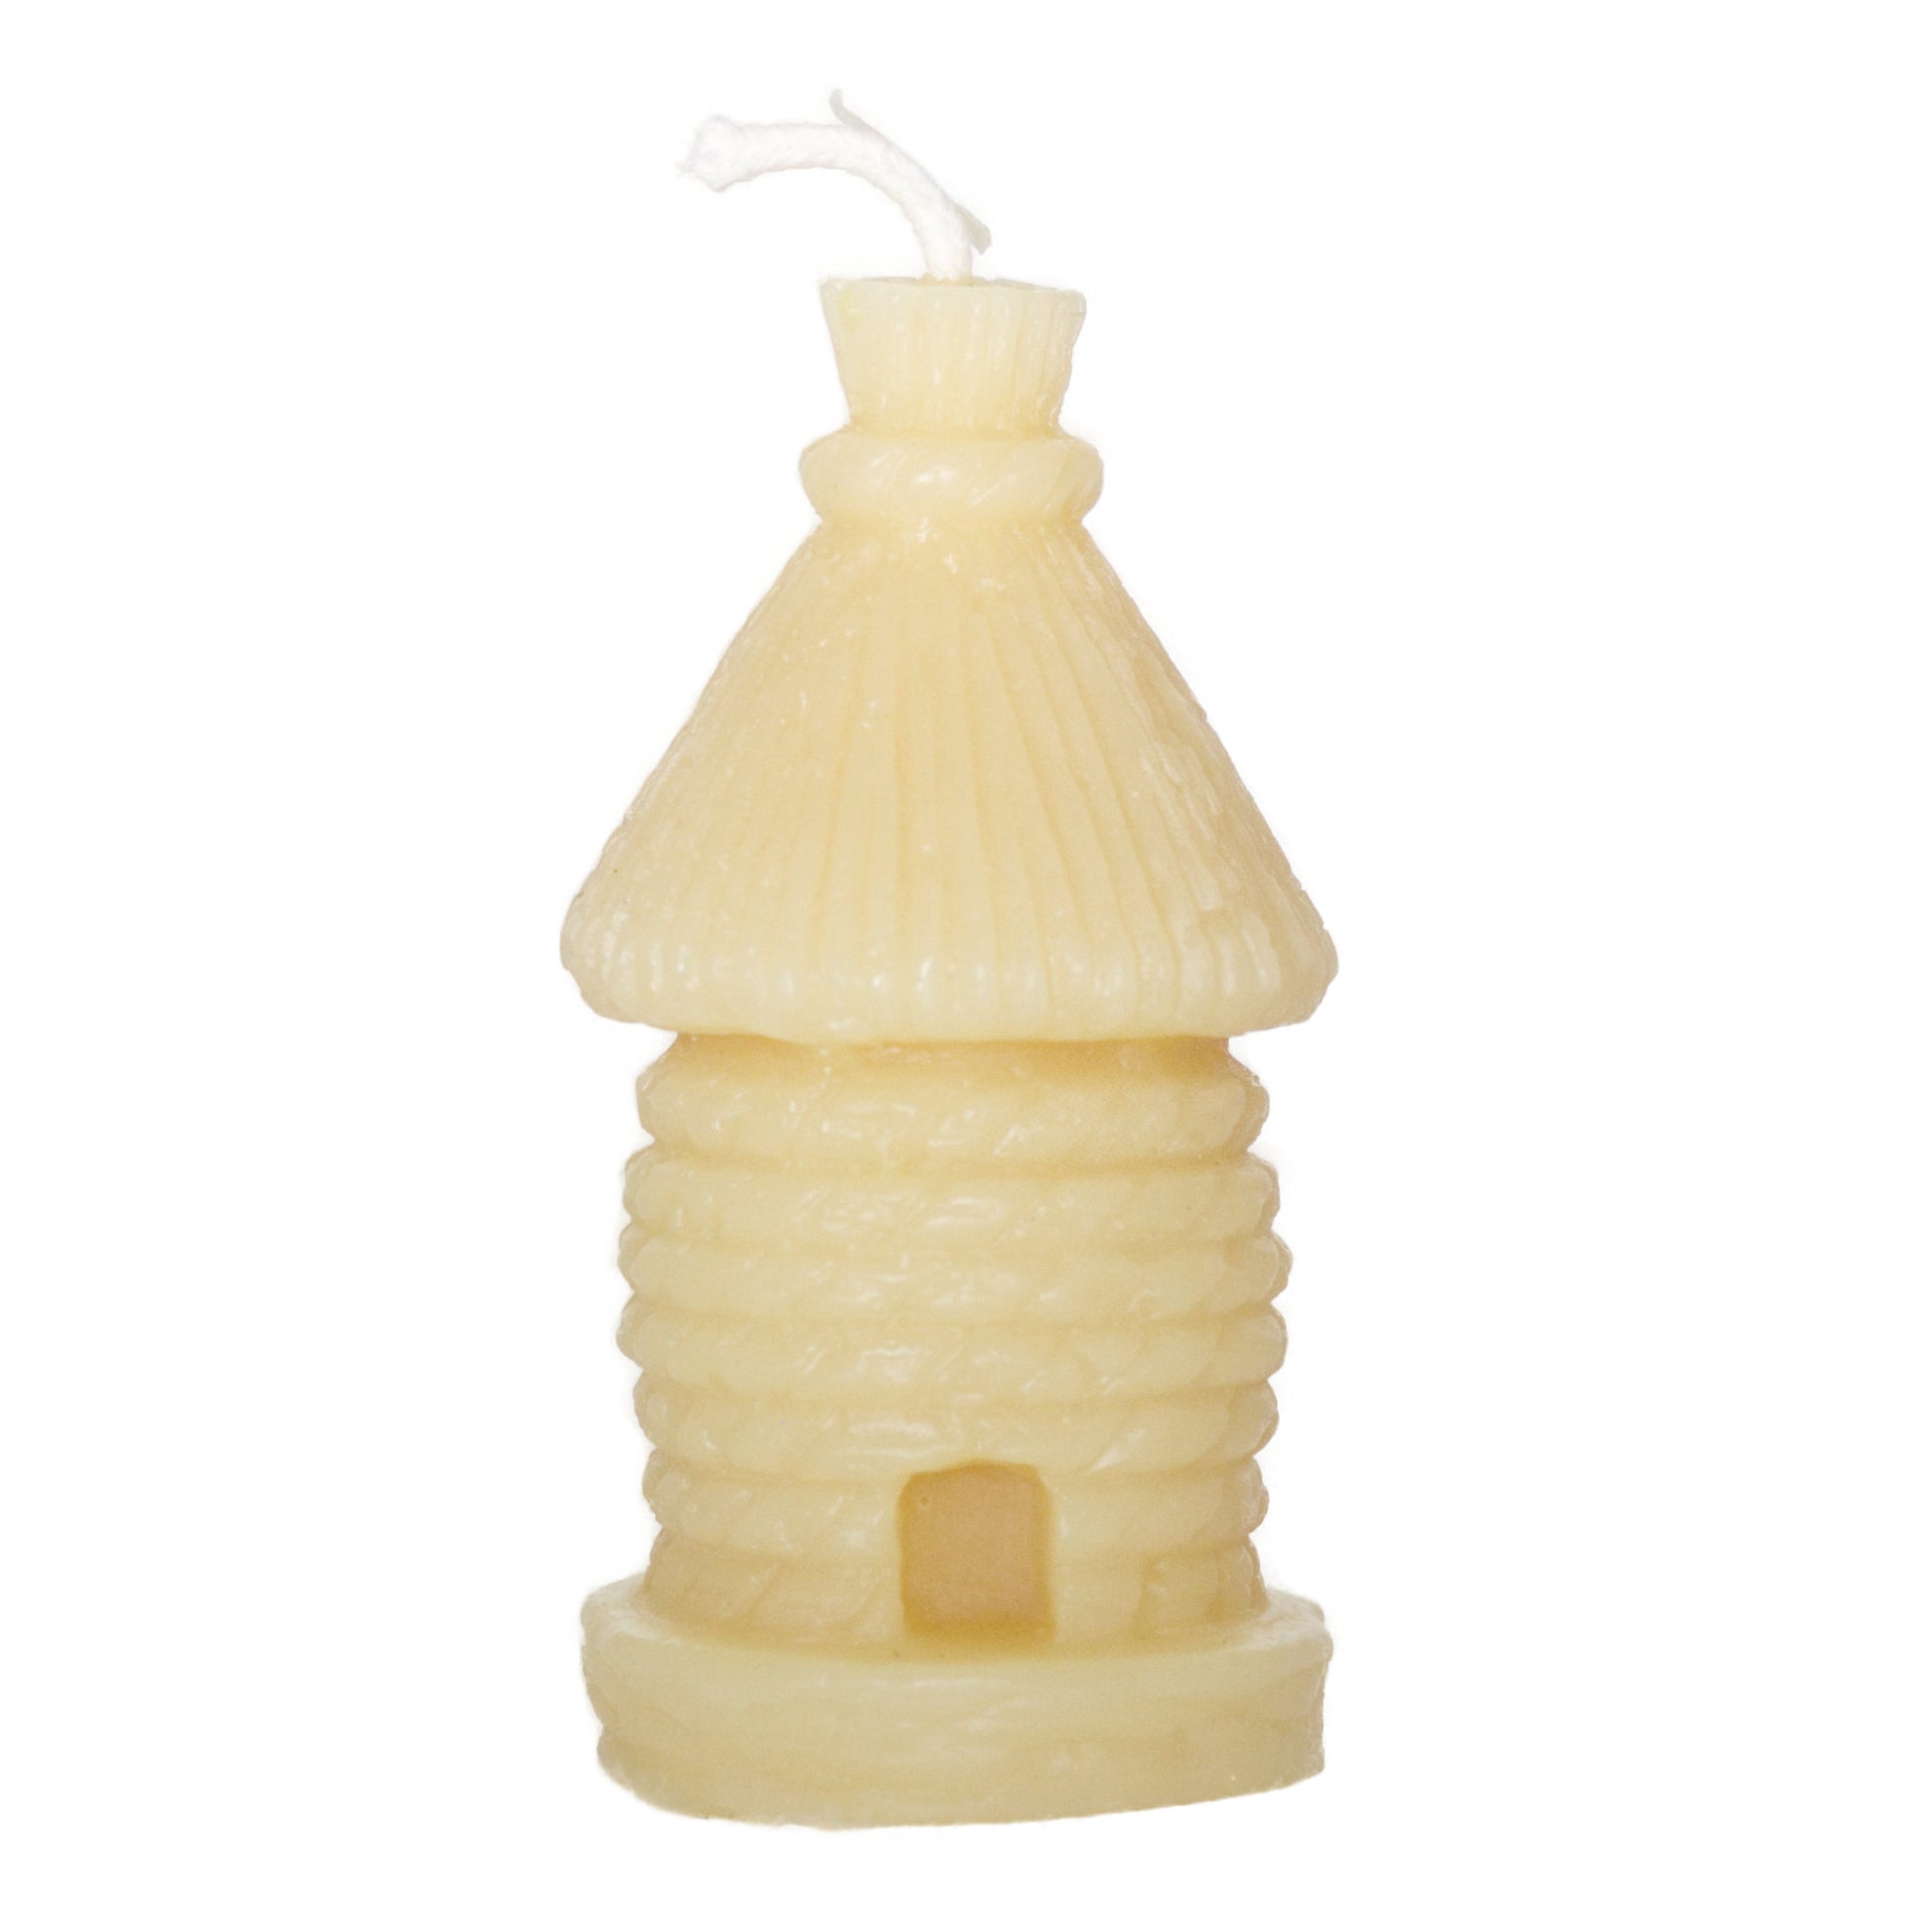 Beeswax candle ornamental skep